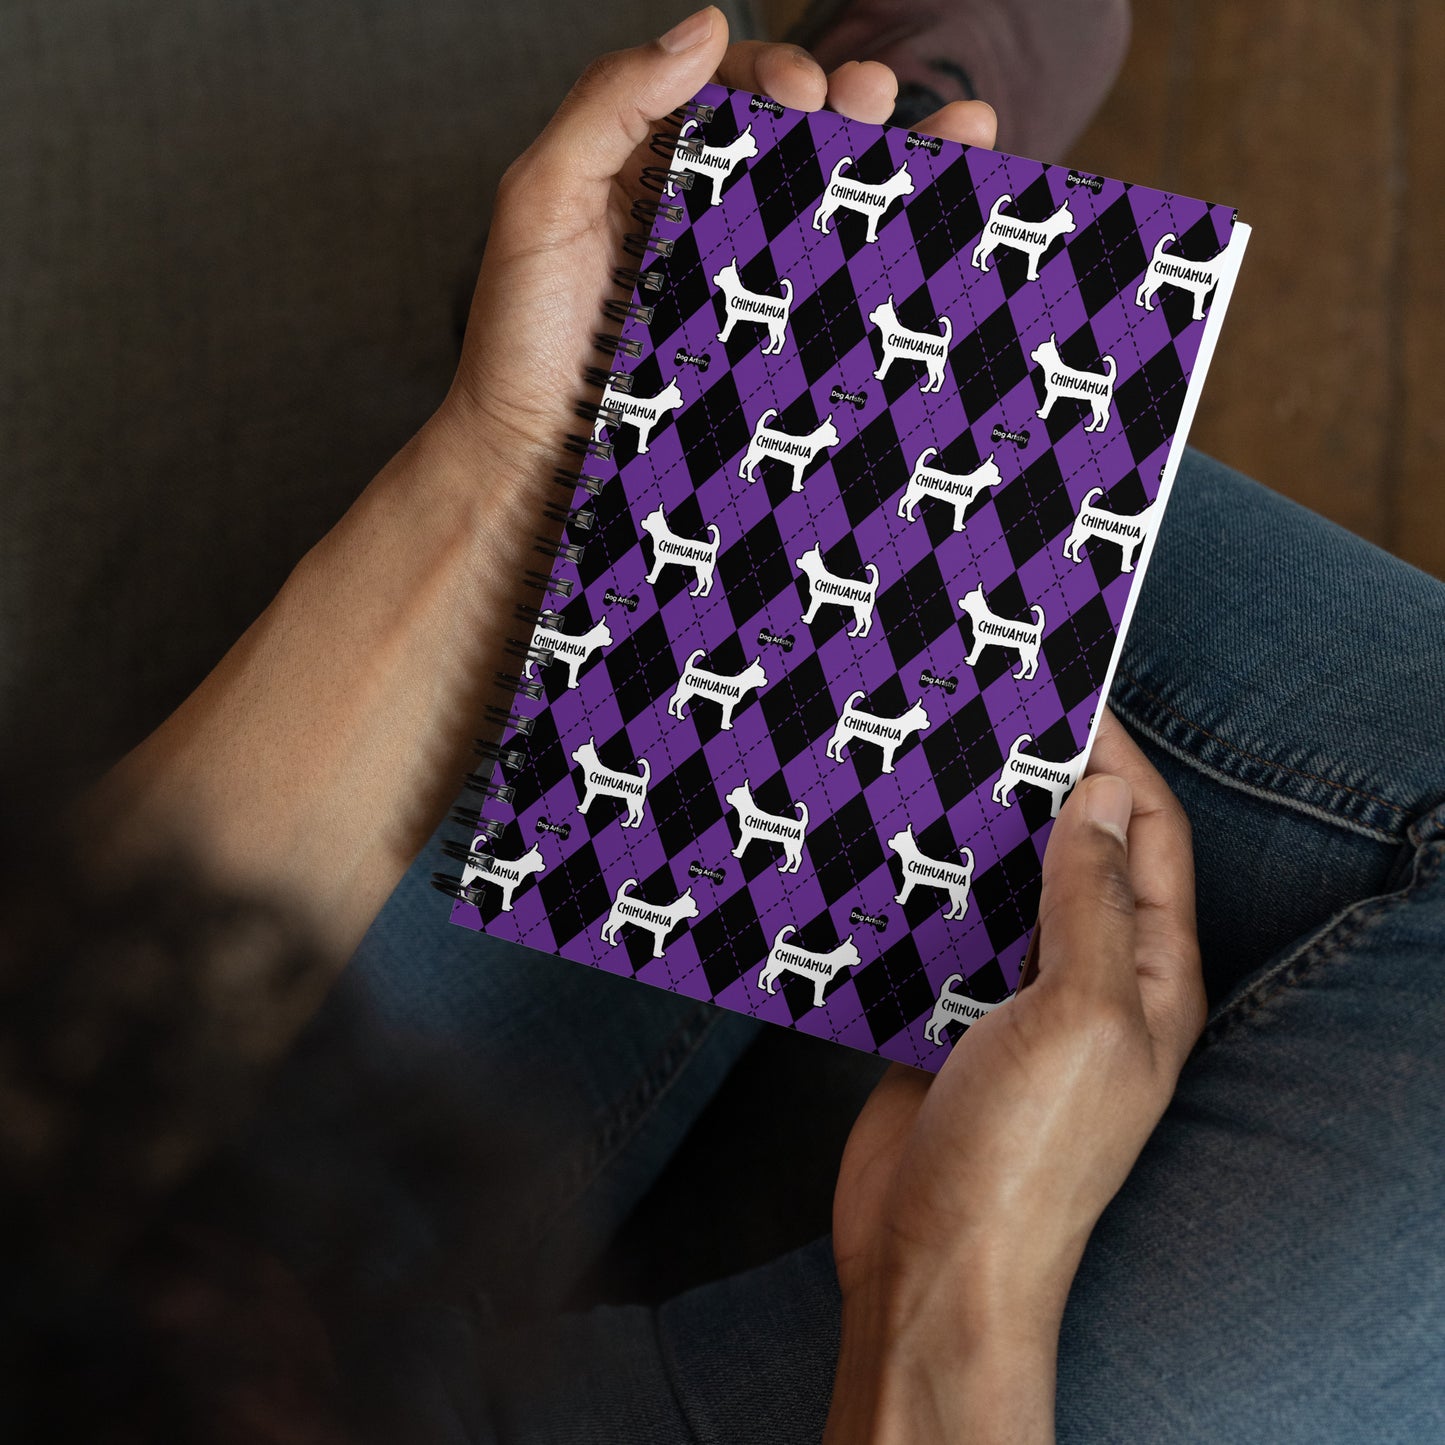 Chihuahua Argyle Purple and Black Spiral Notebooks